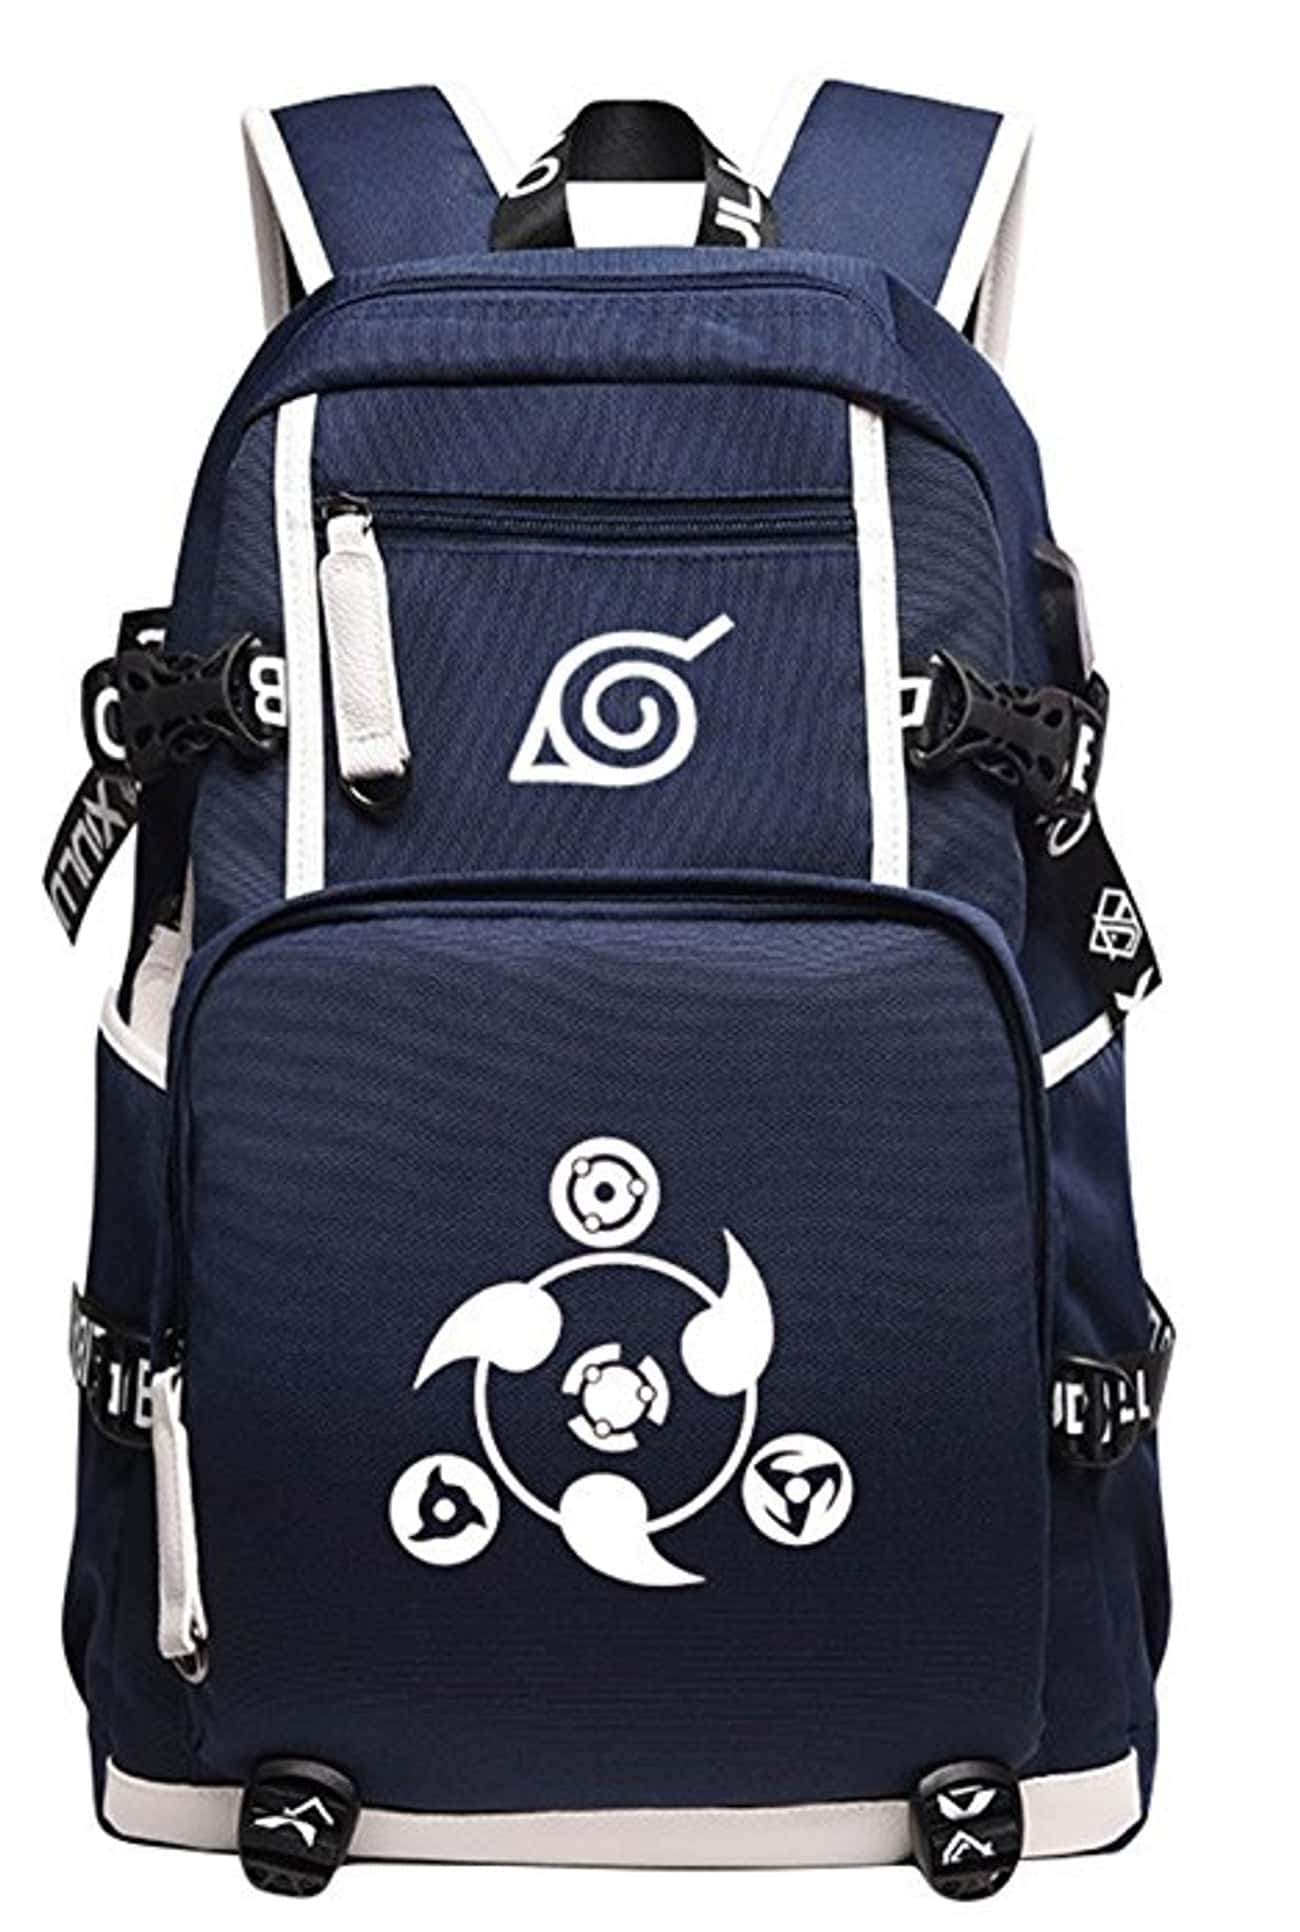 Gumstyle Naruto Book Bag with USB Charging Port Laptop